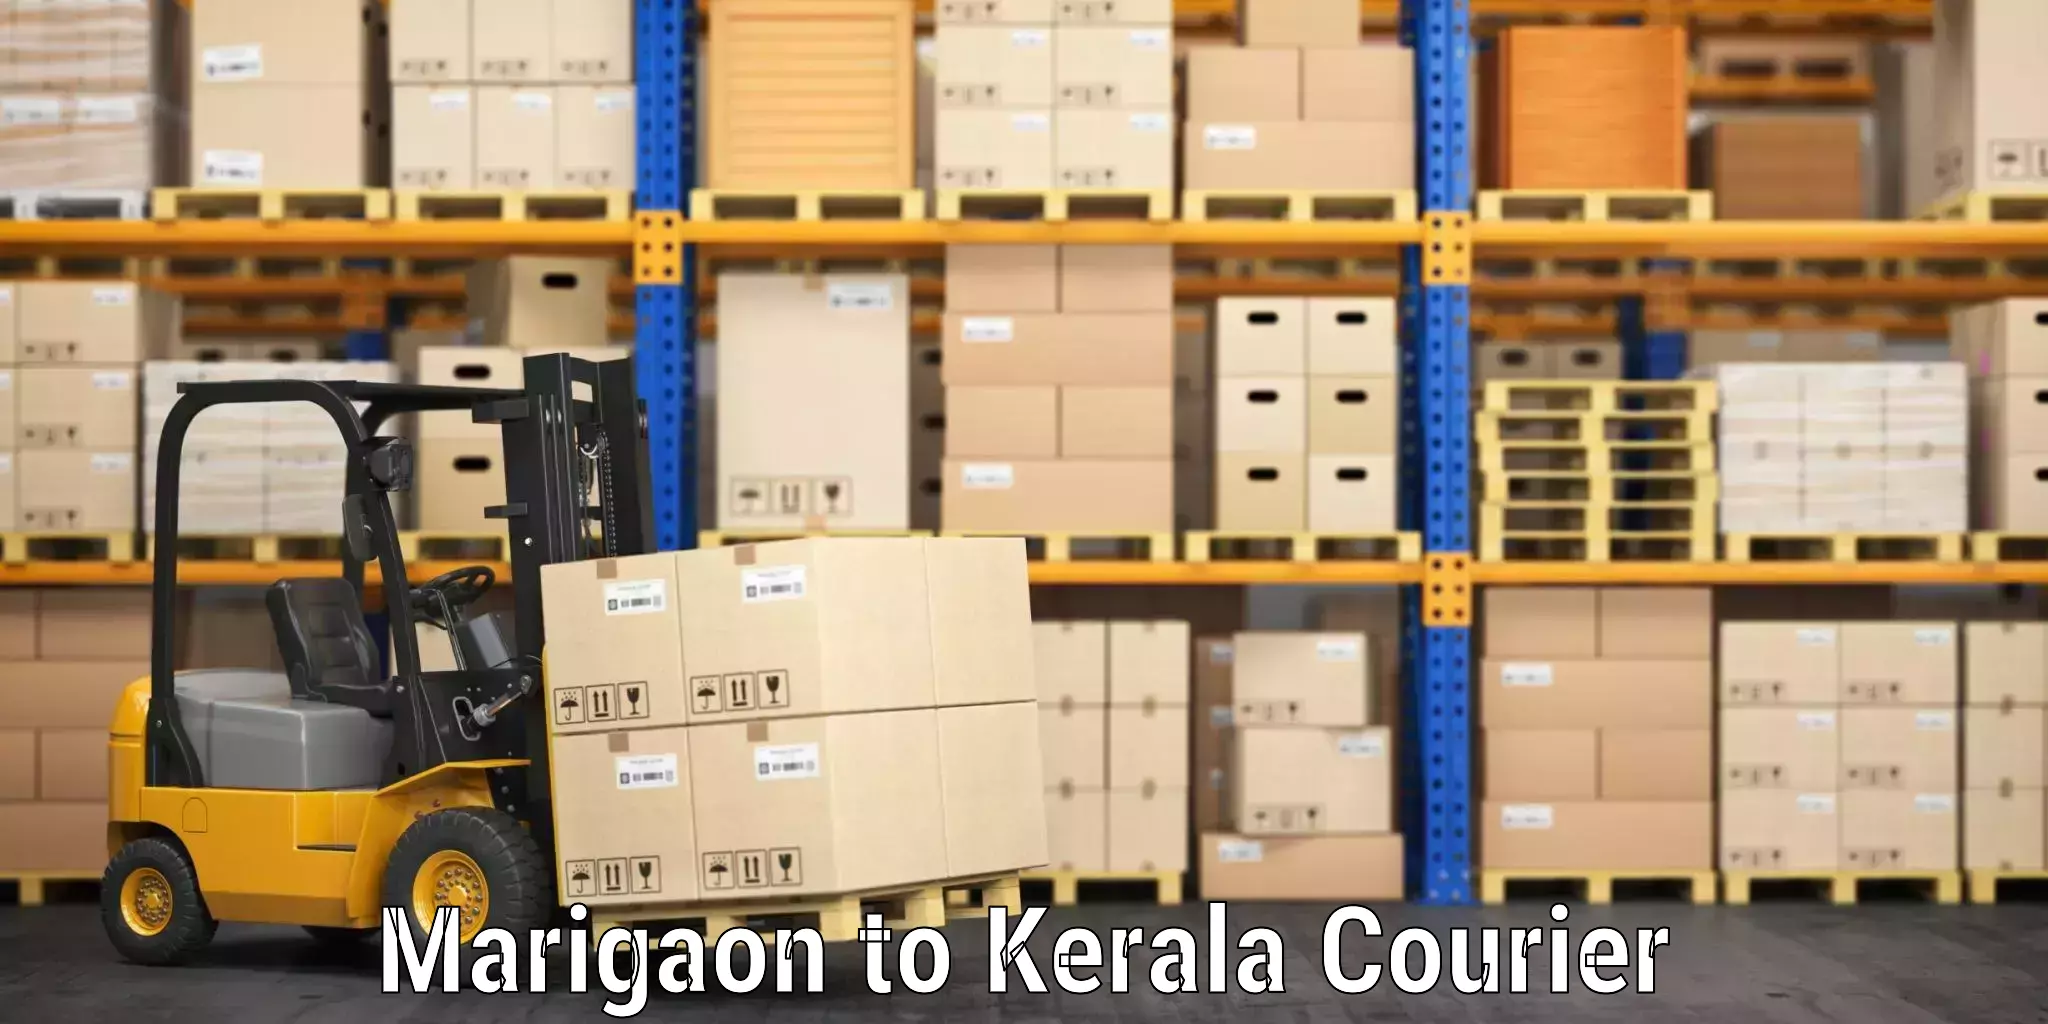 Luggage forwarding service Marigaon to Cochin University of Science and Technology